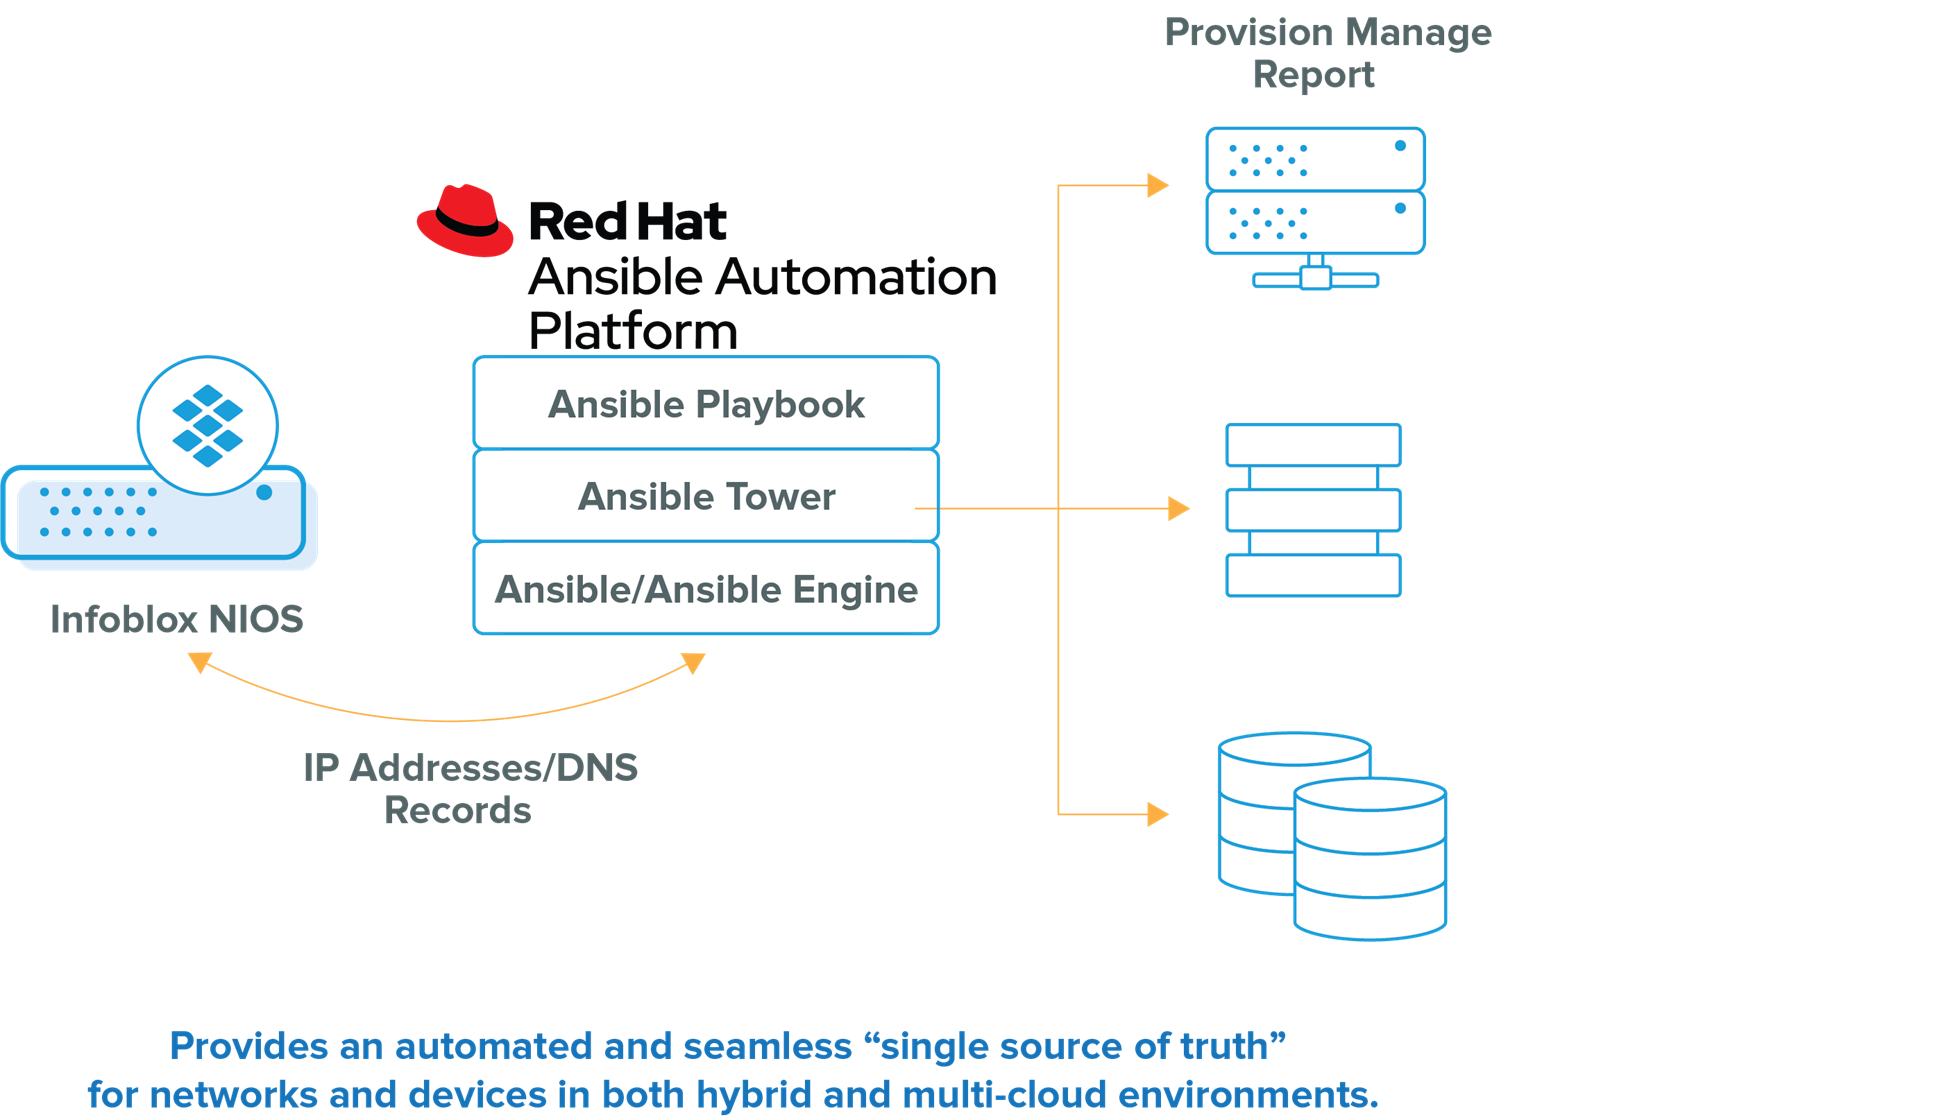 Ansible collections